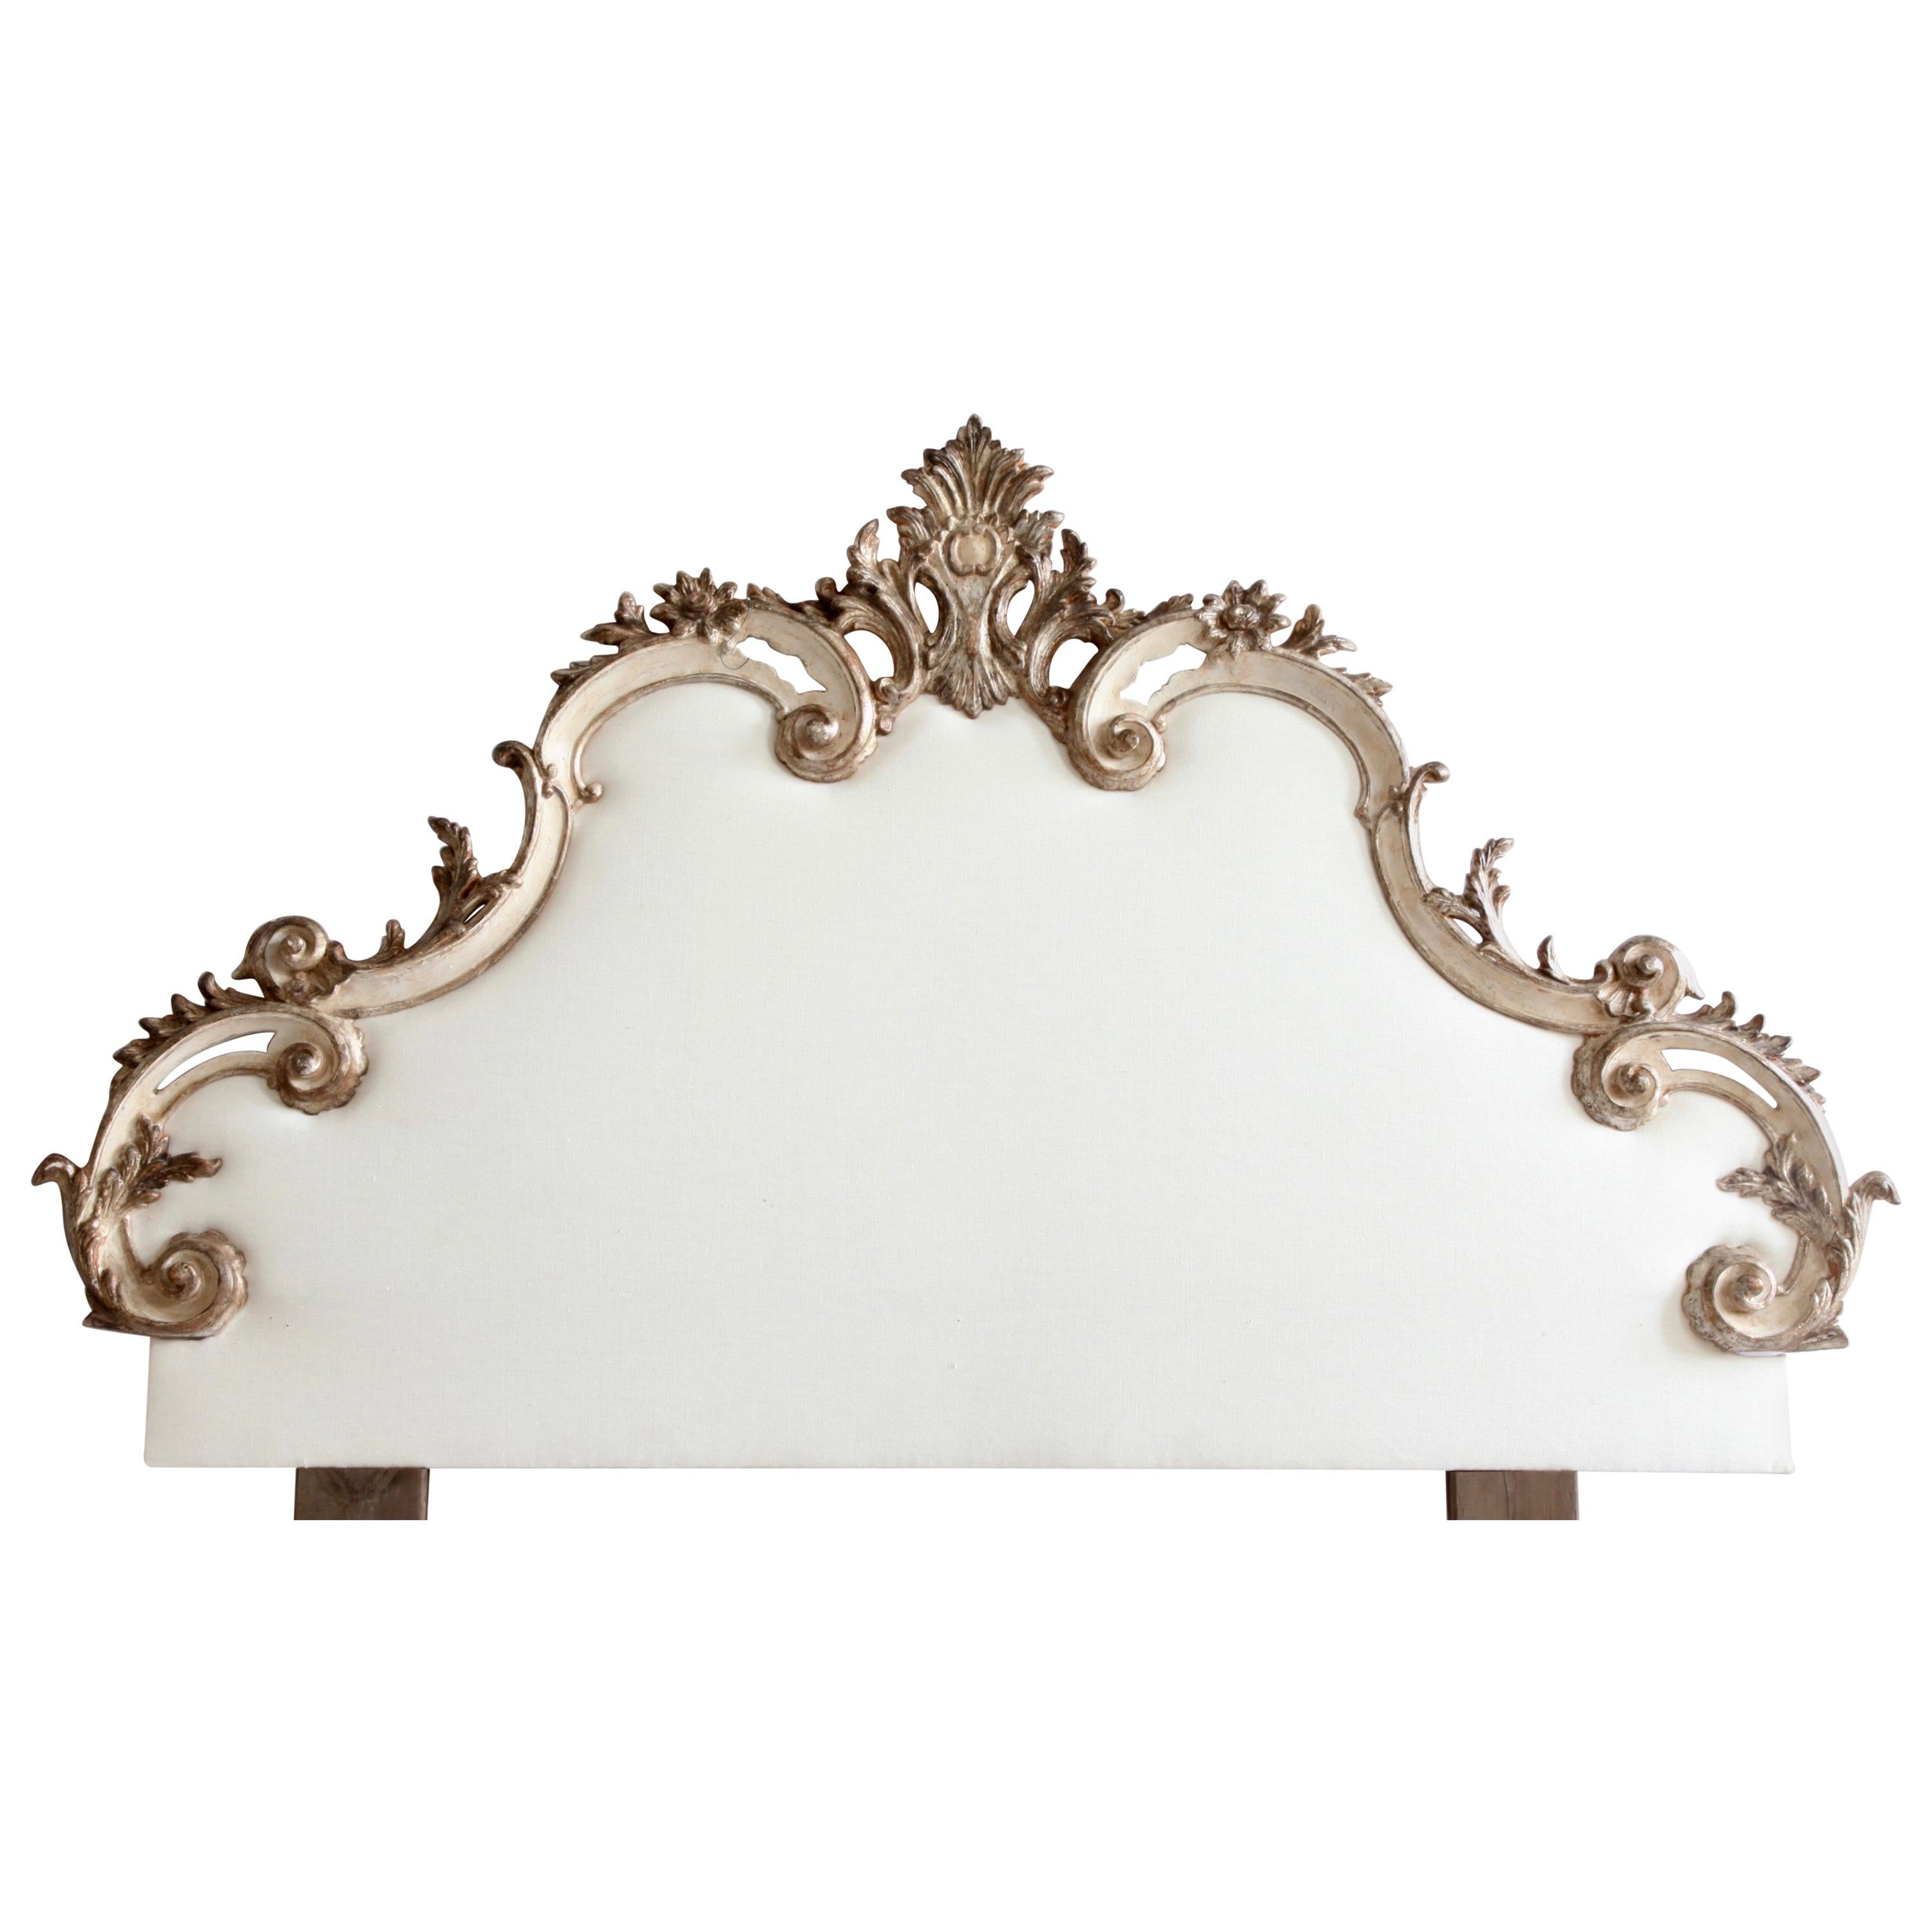 Early 20th Century Venetian Headboard in Antique White with Silver Highlights